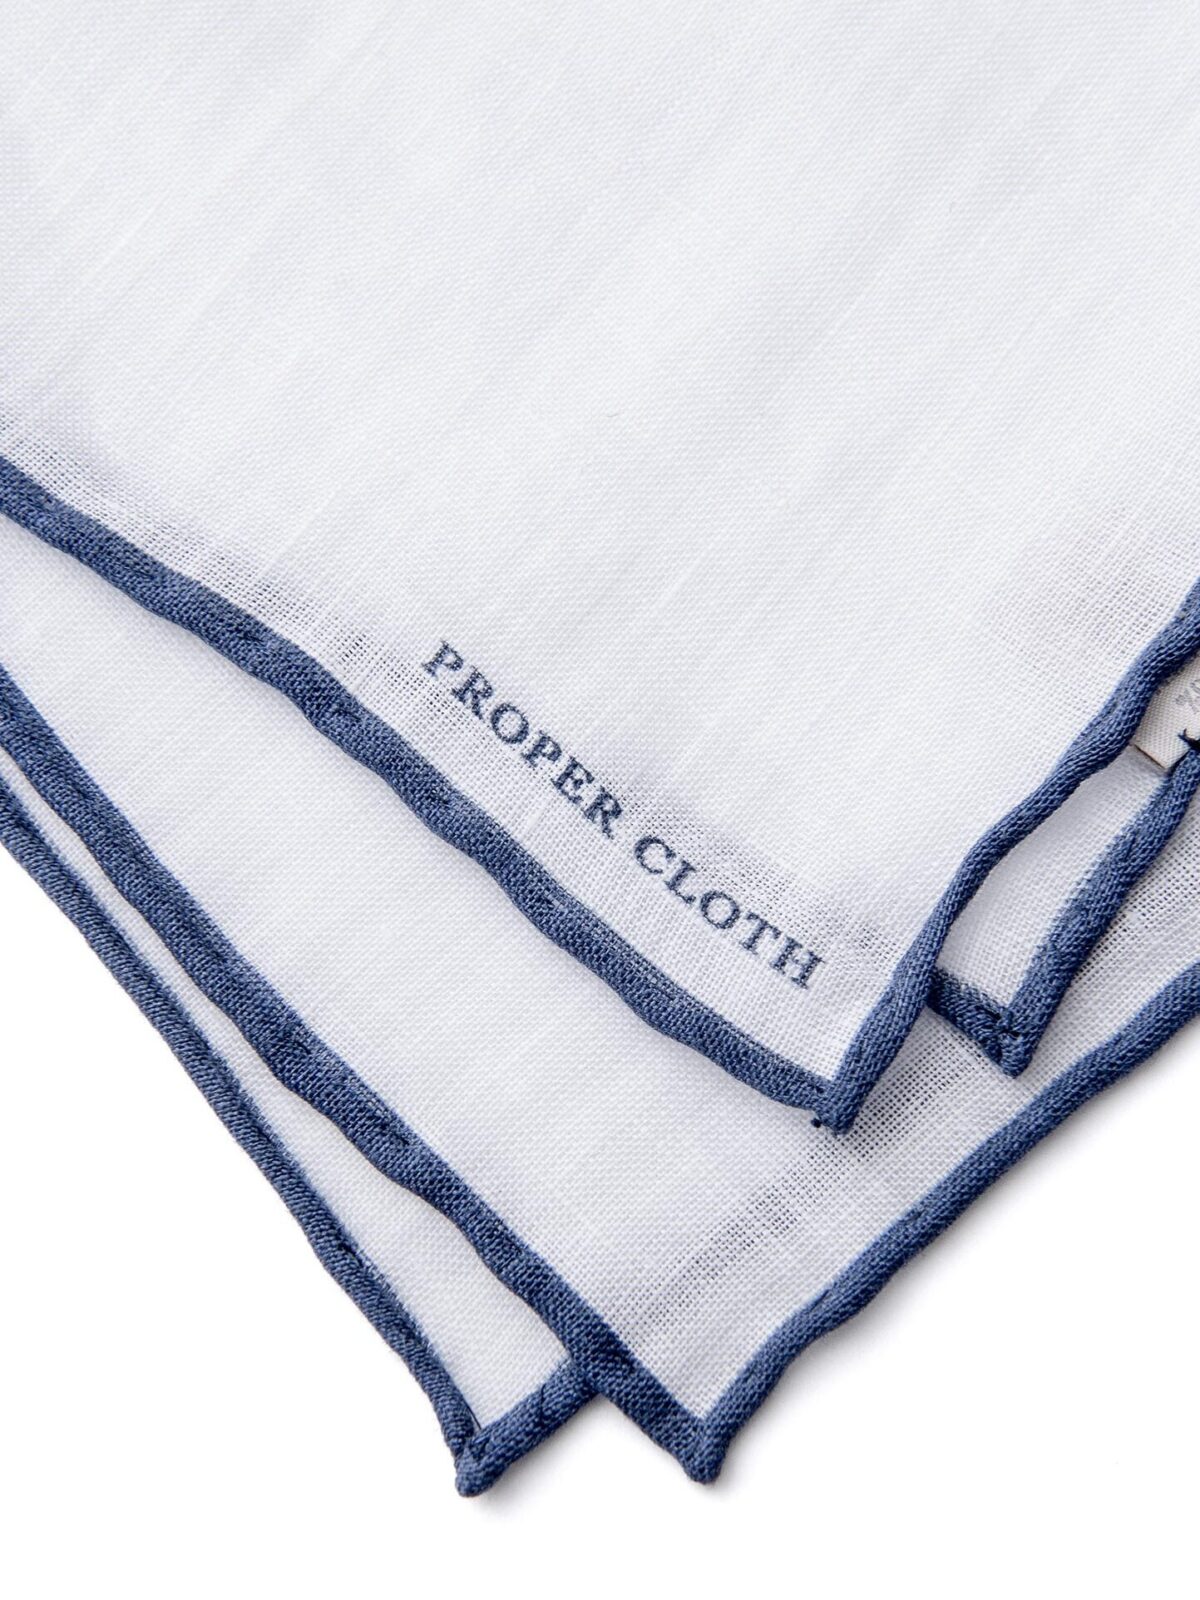 White with Navy Tipping Linen Pocket Square